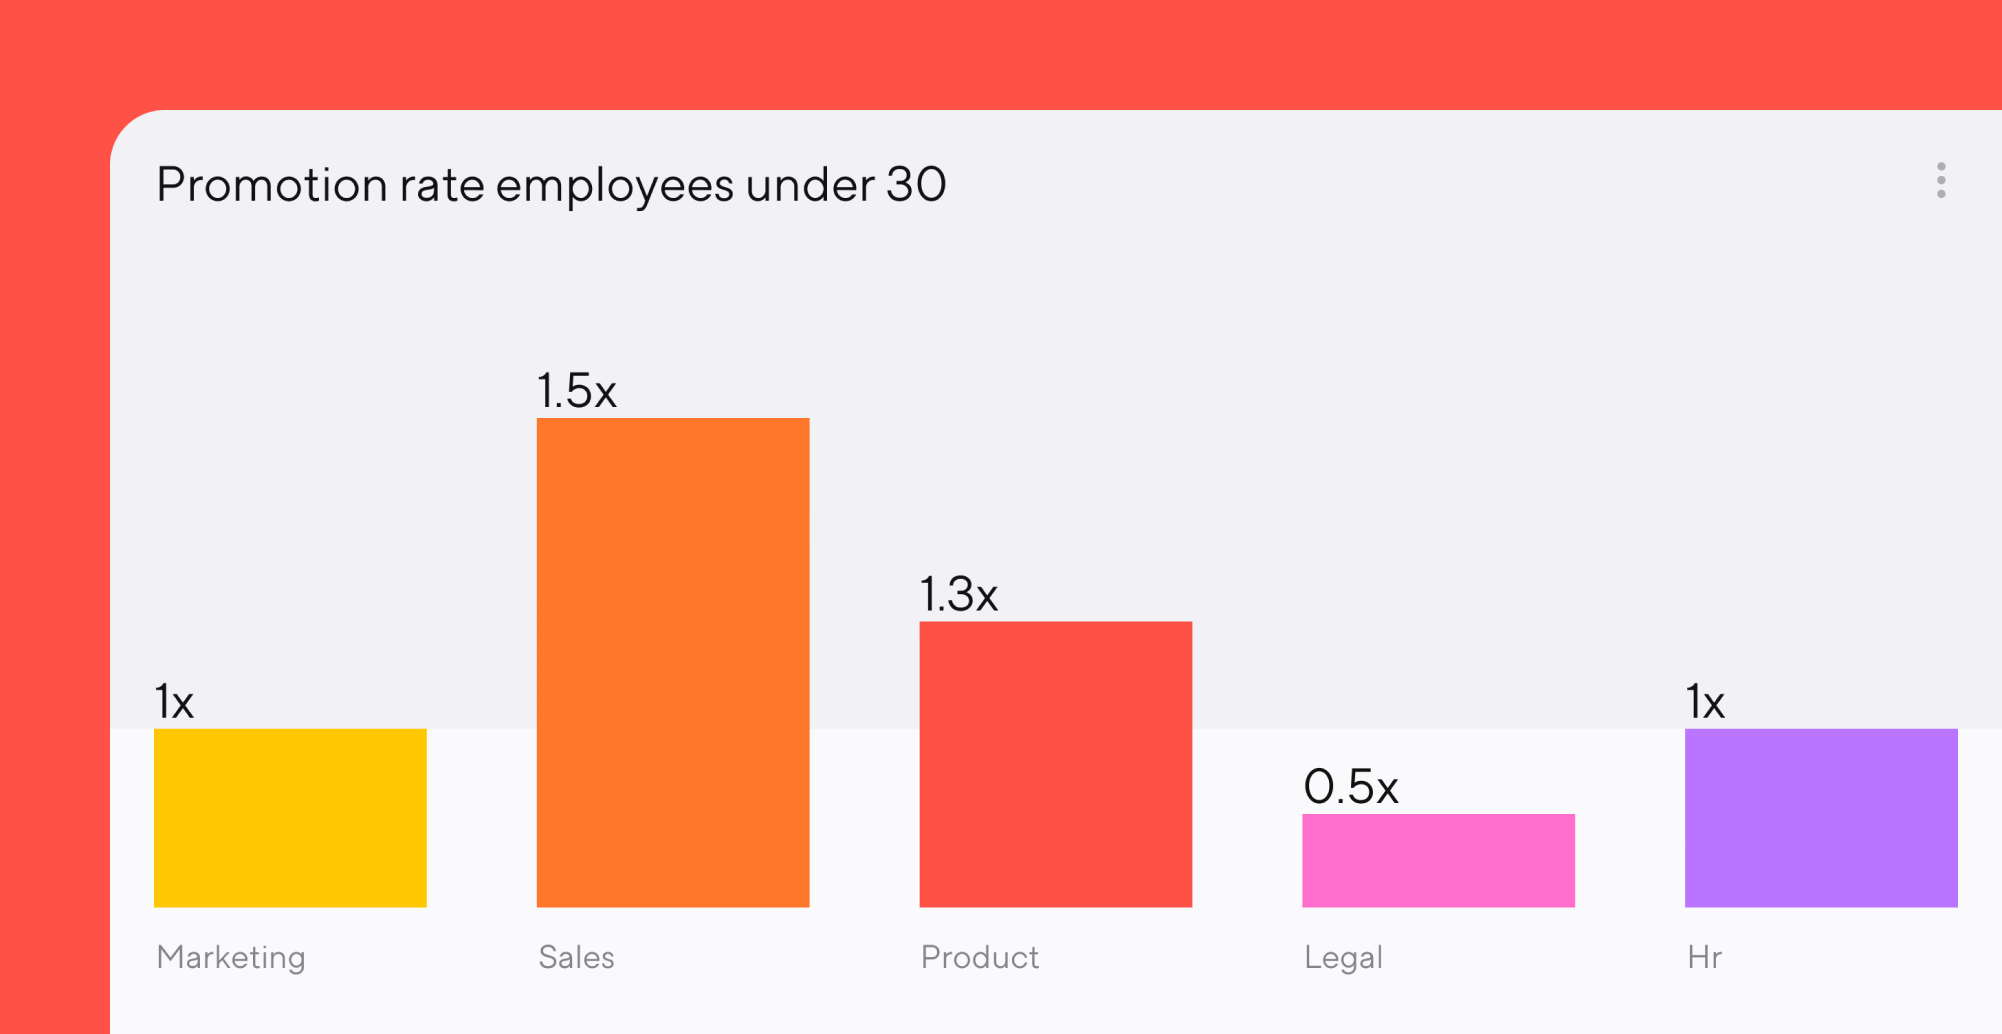 A bar graph showing indexed retention rates for employees under 30 across 5 different departments: marketing, sales, product, legal, and HR.